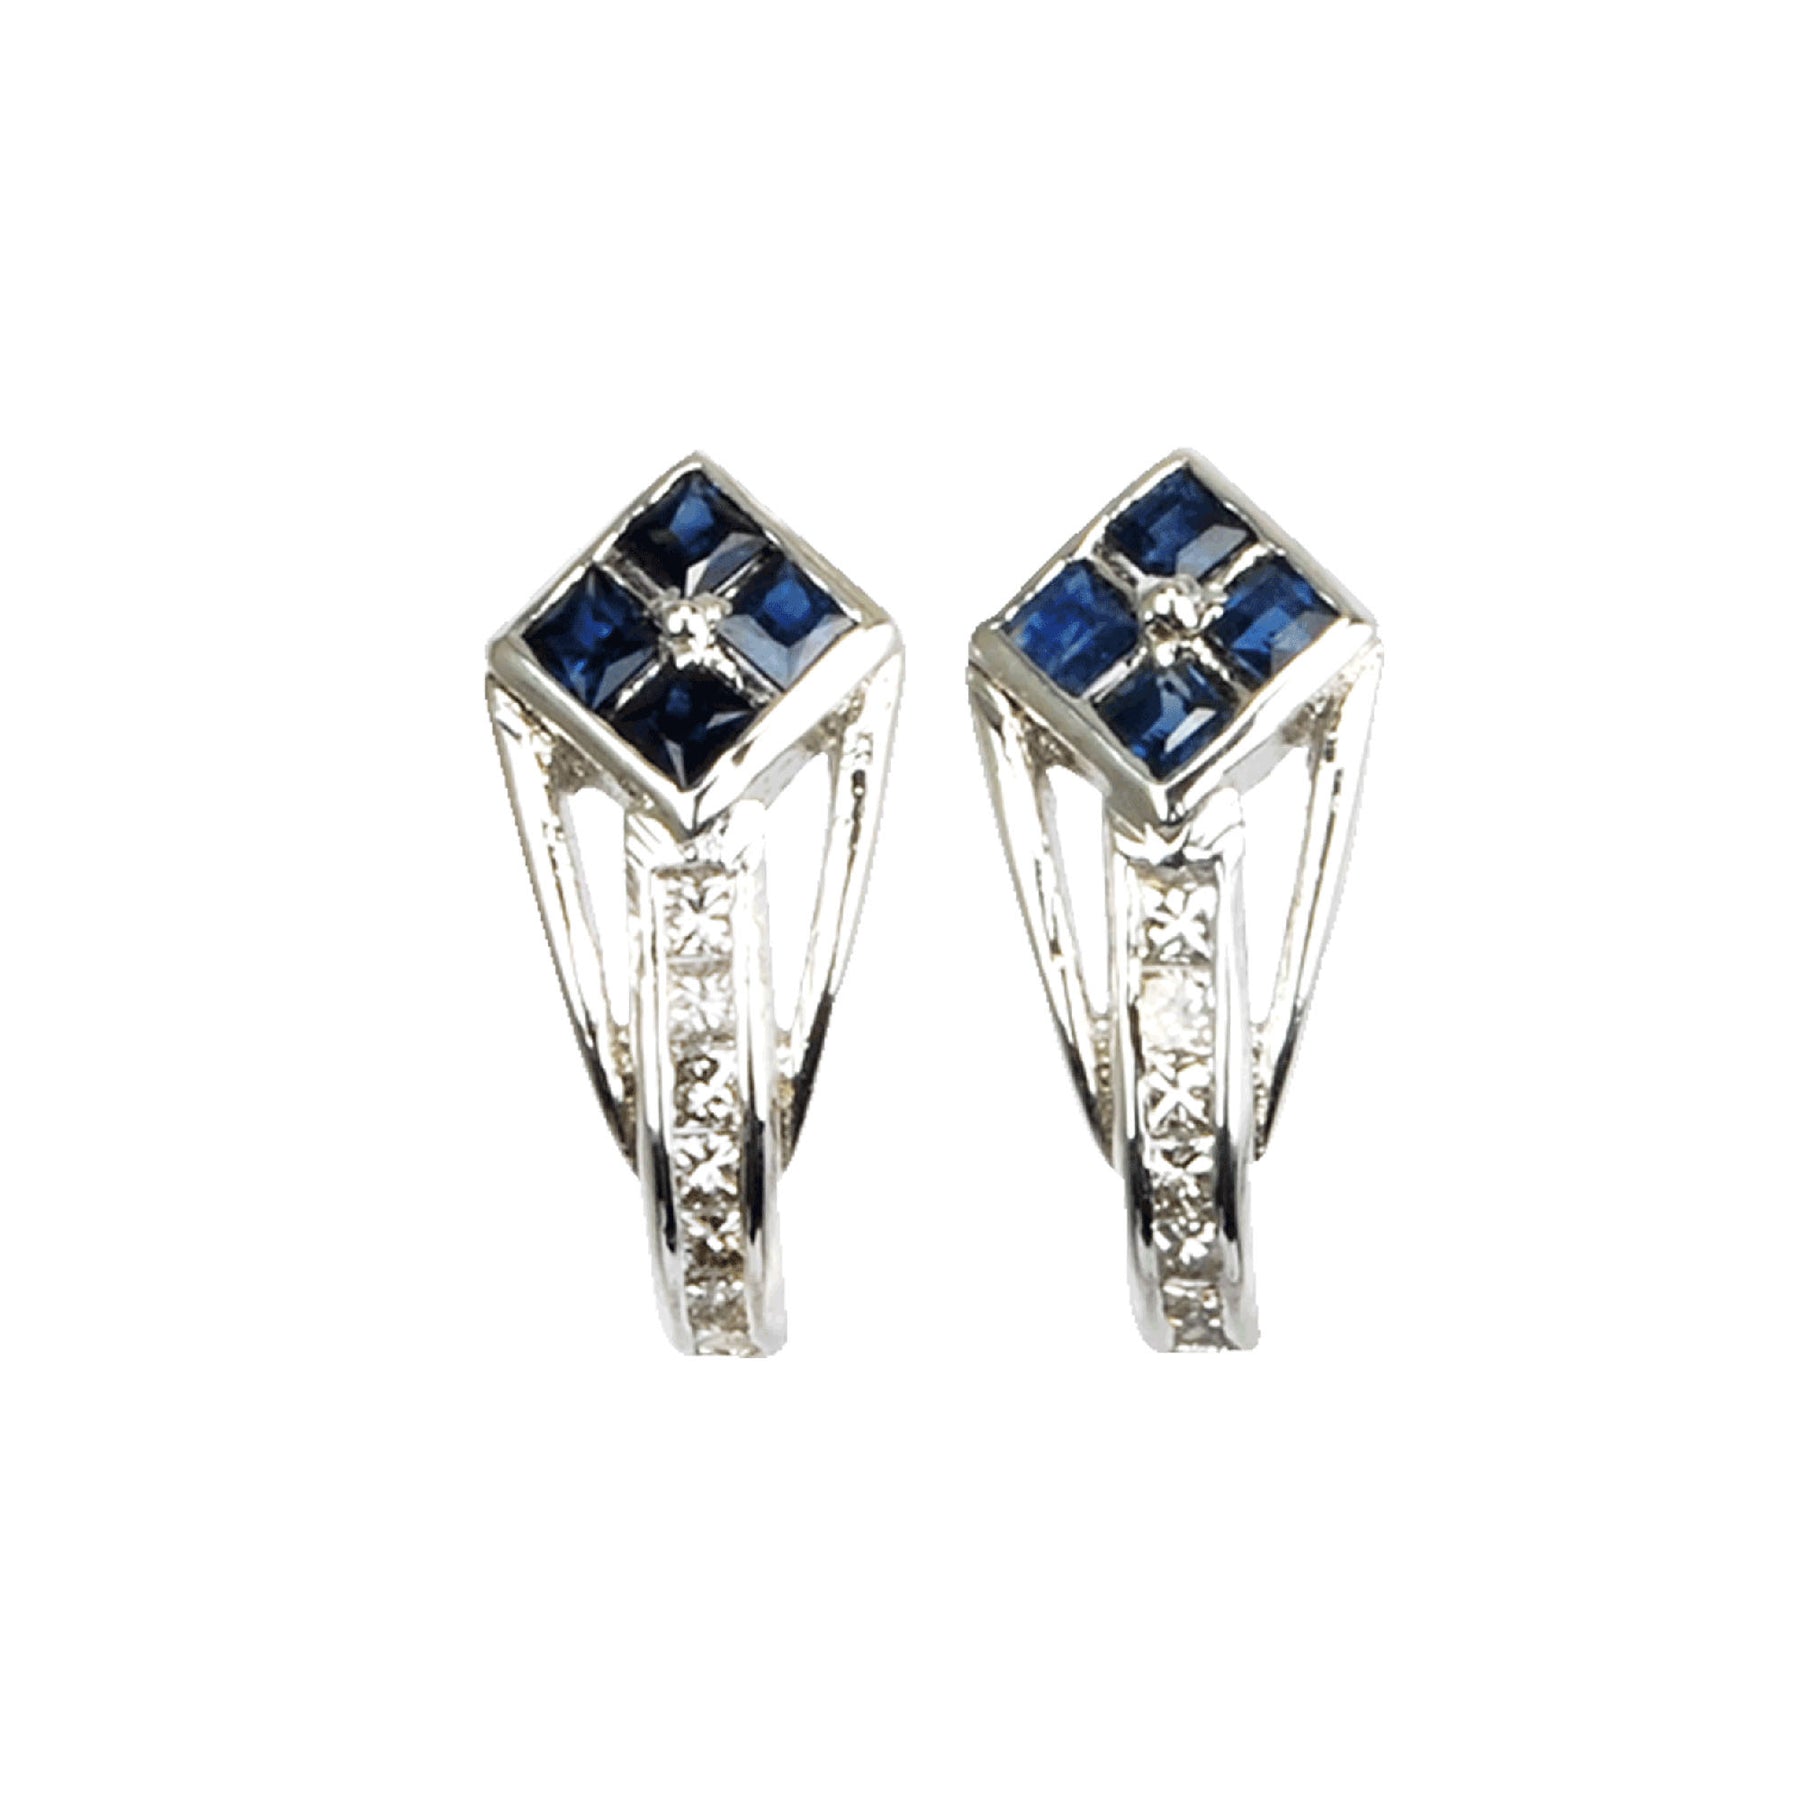 Silver Earrings with Diamonds and Princess cut Blue Sapphire